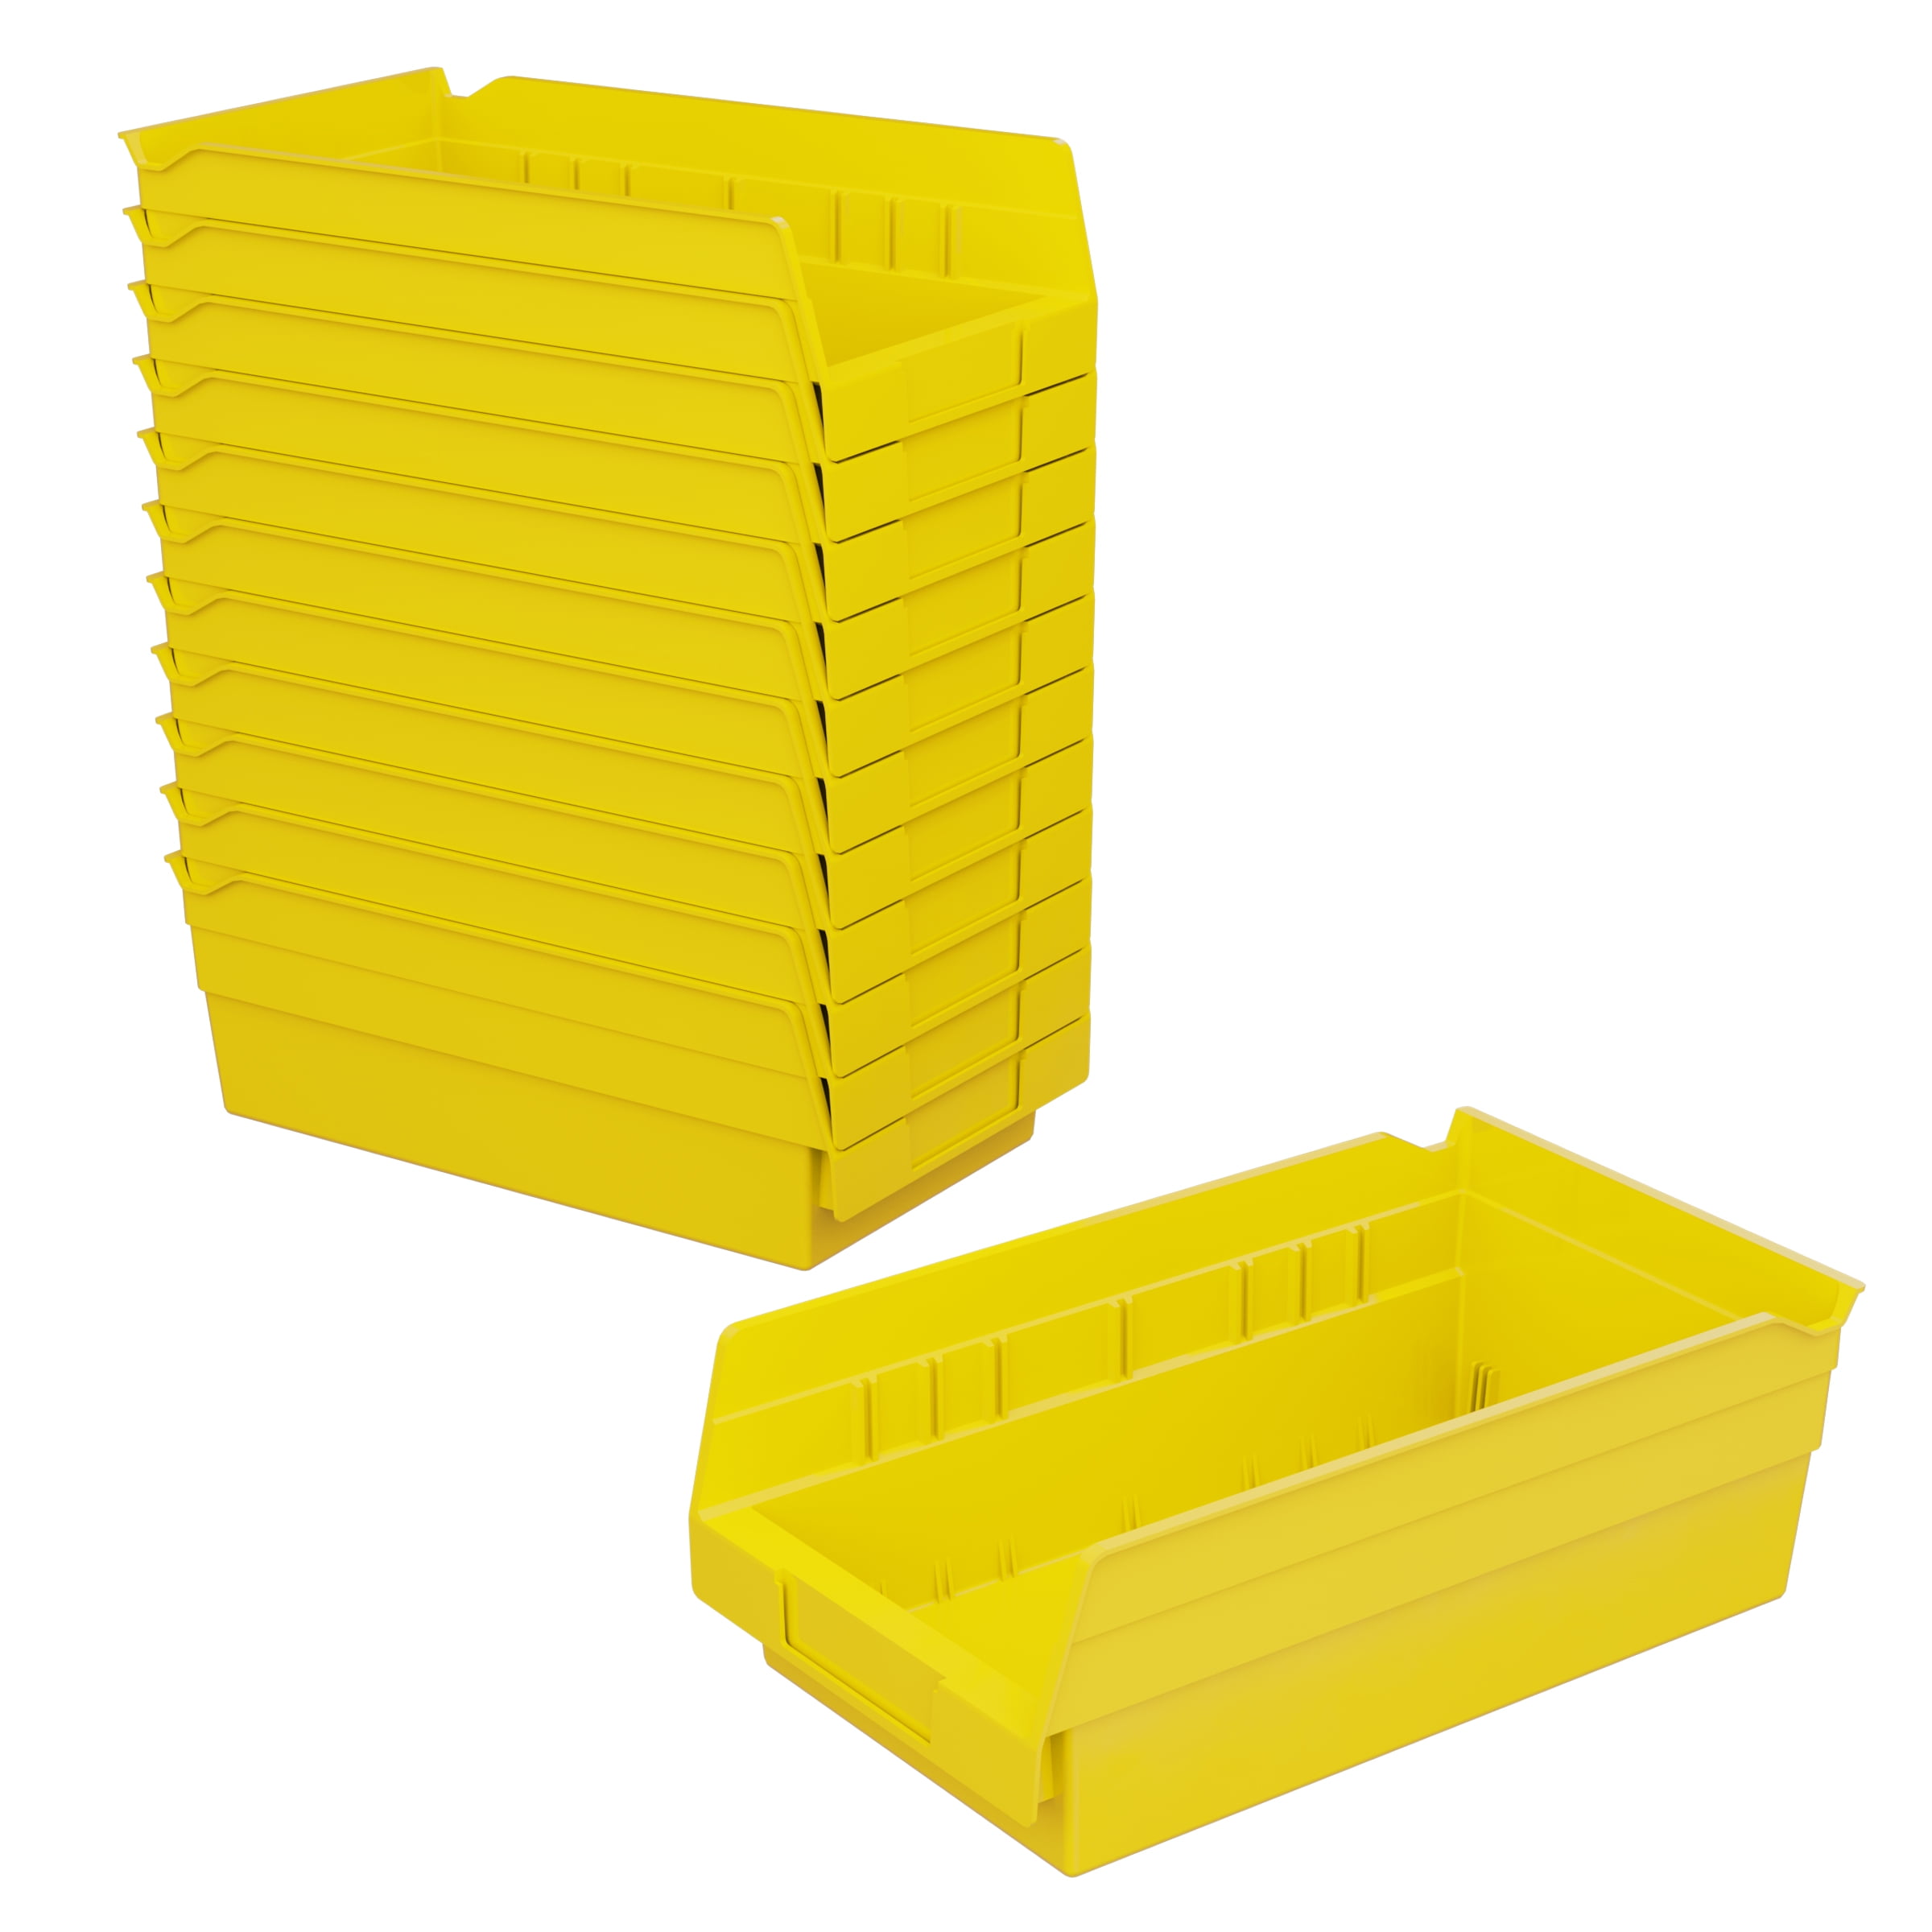 Yellow stacking boxes: Plastic boxes